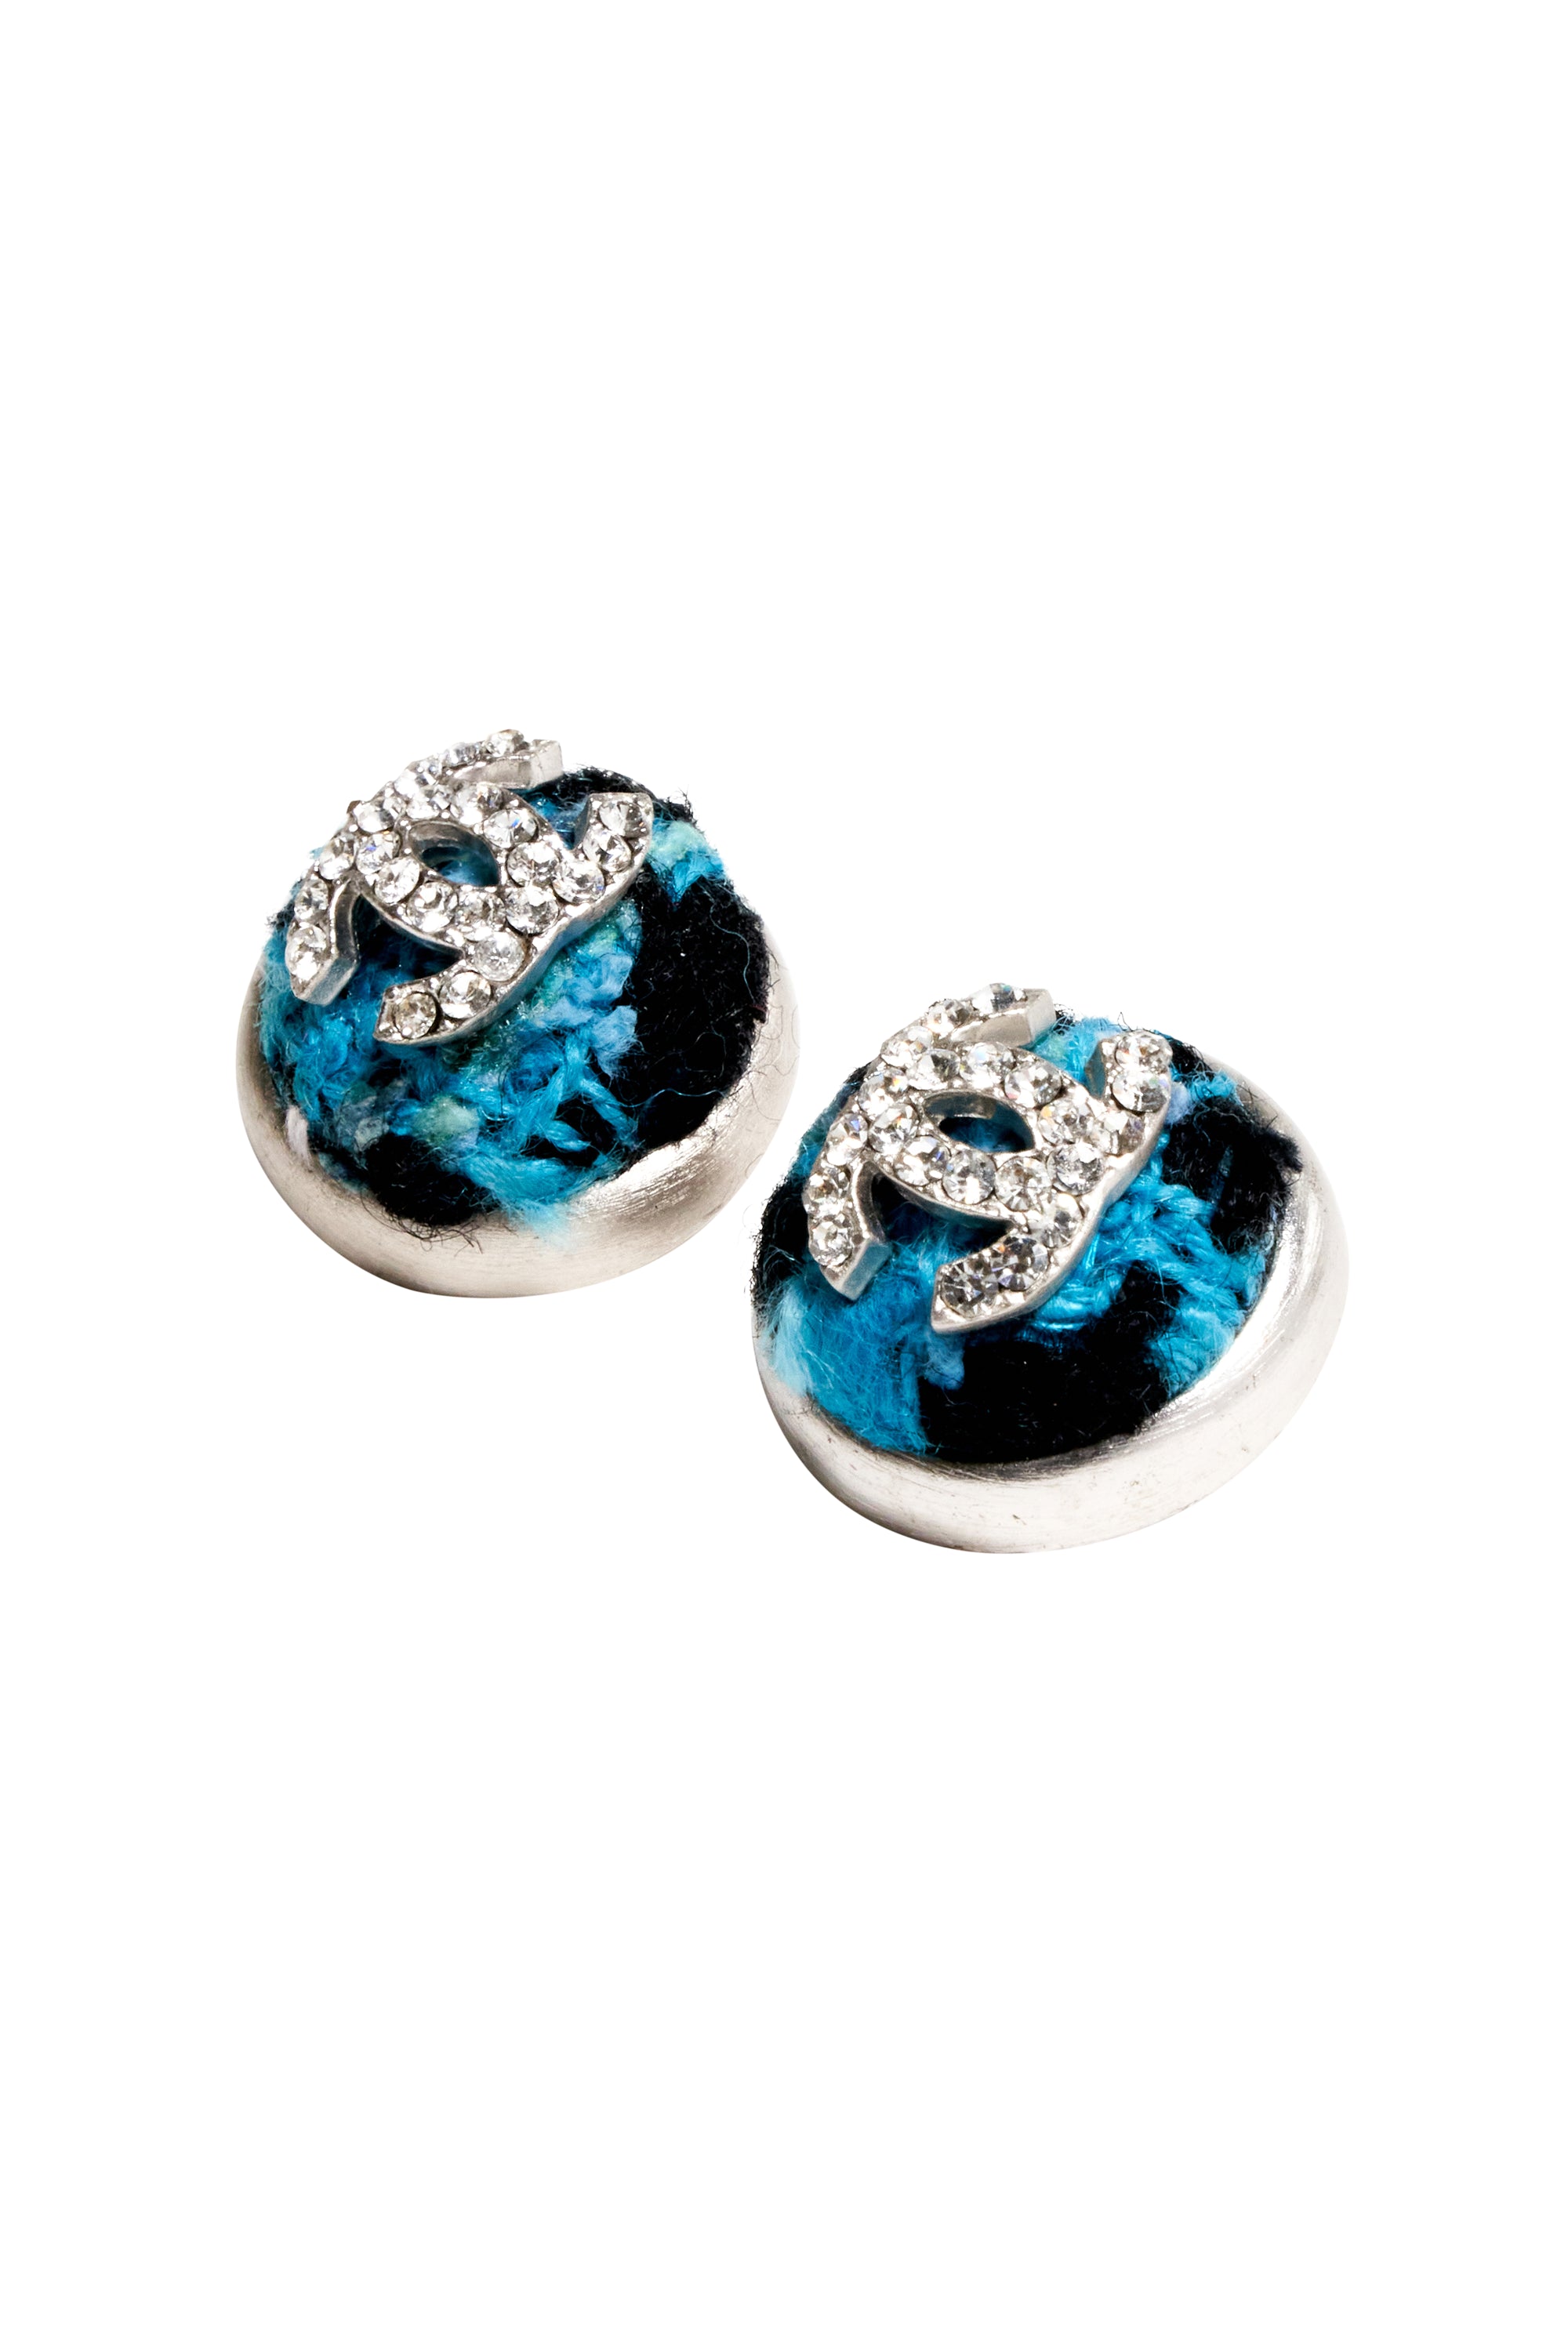 Chanel Blue and Black Tweed Silver Crystal Clip Earrings 07A